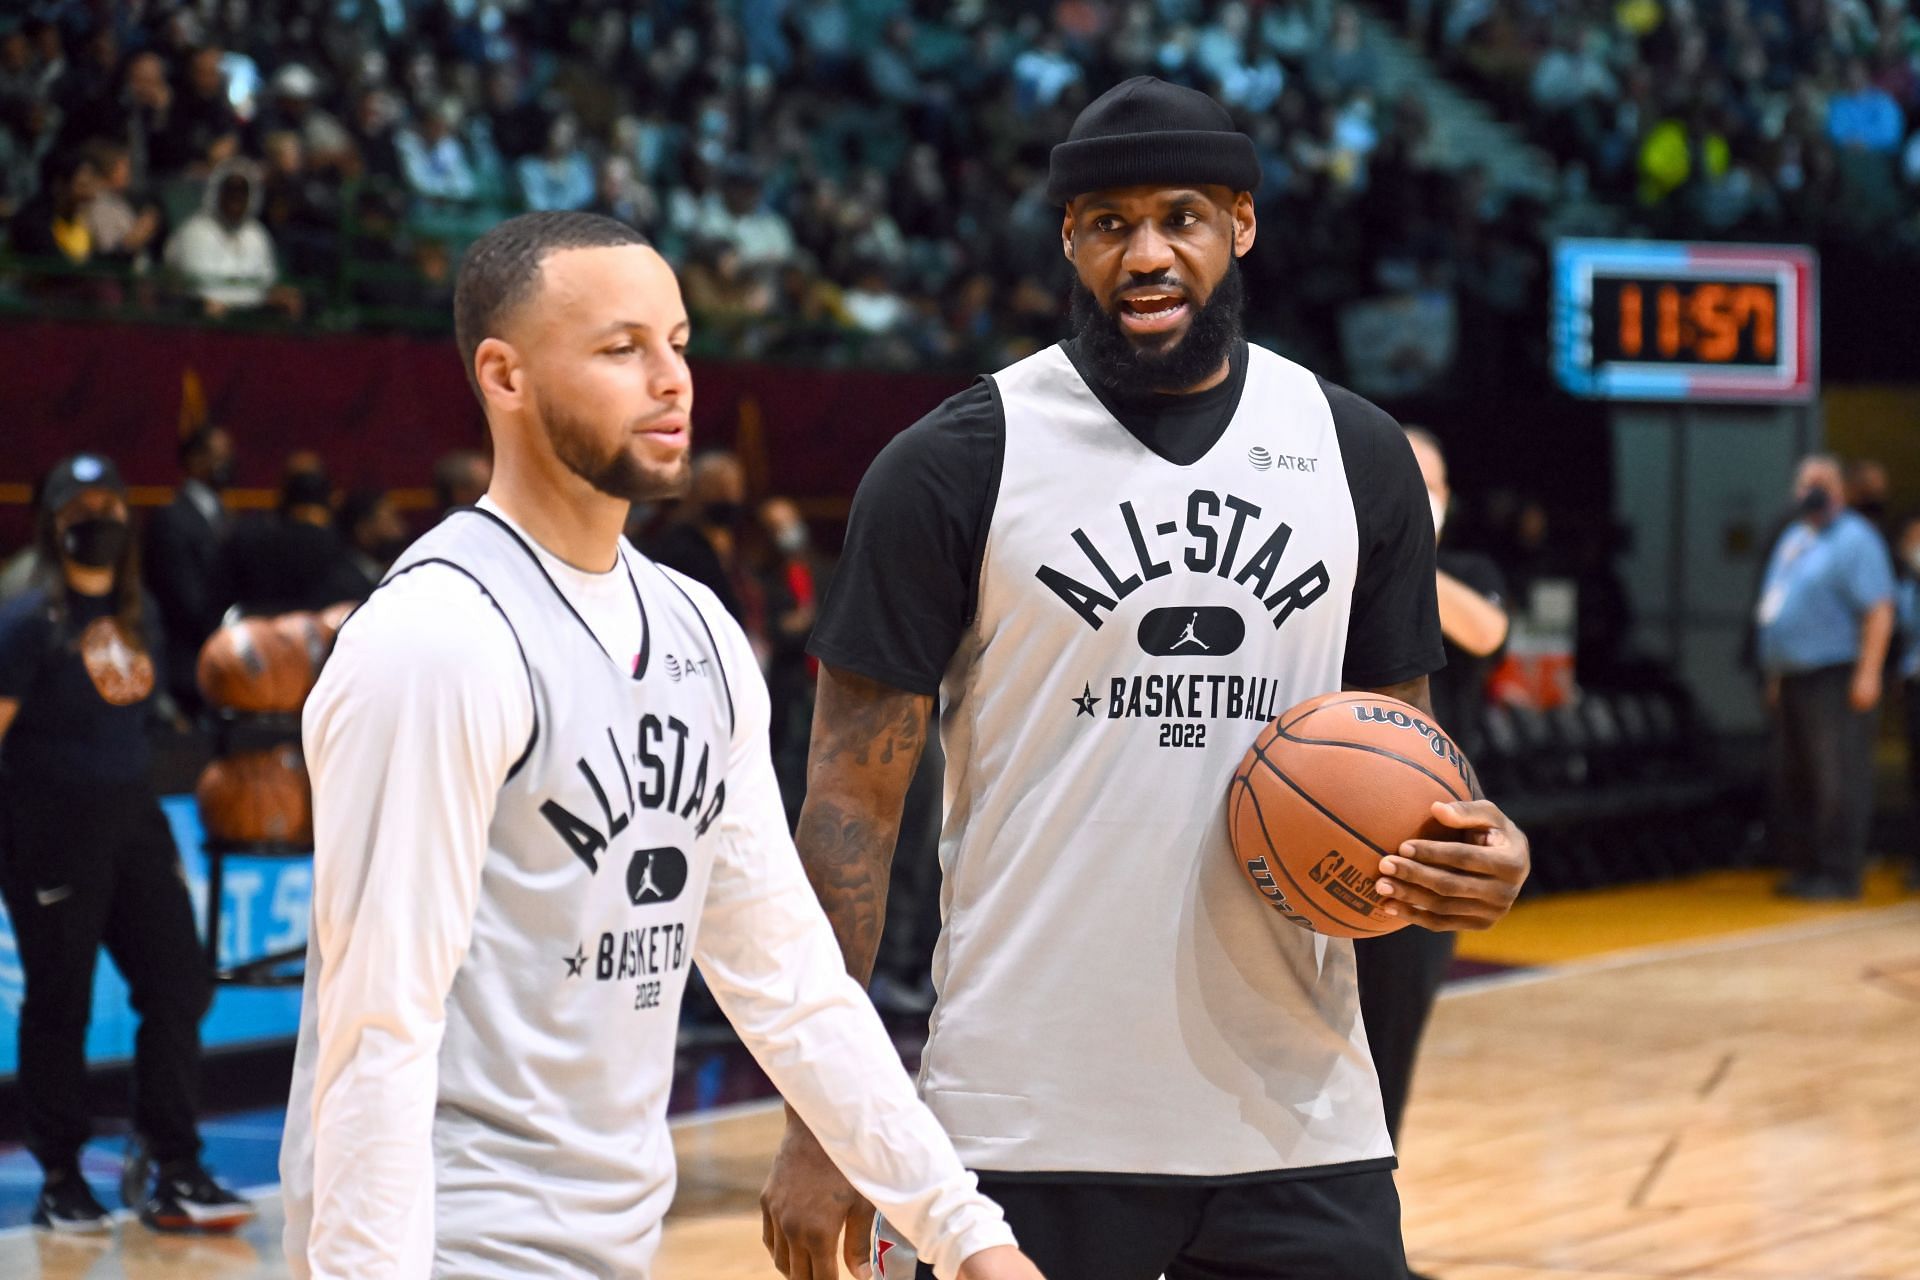 Steph Curry and LeBron James during the 2022 NBA All-Star Weekend